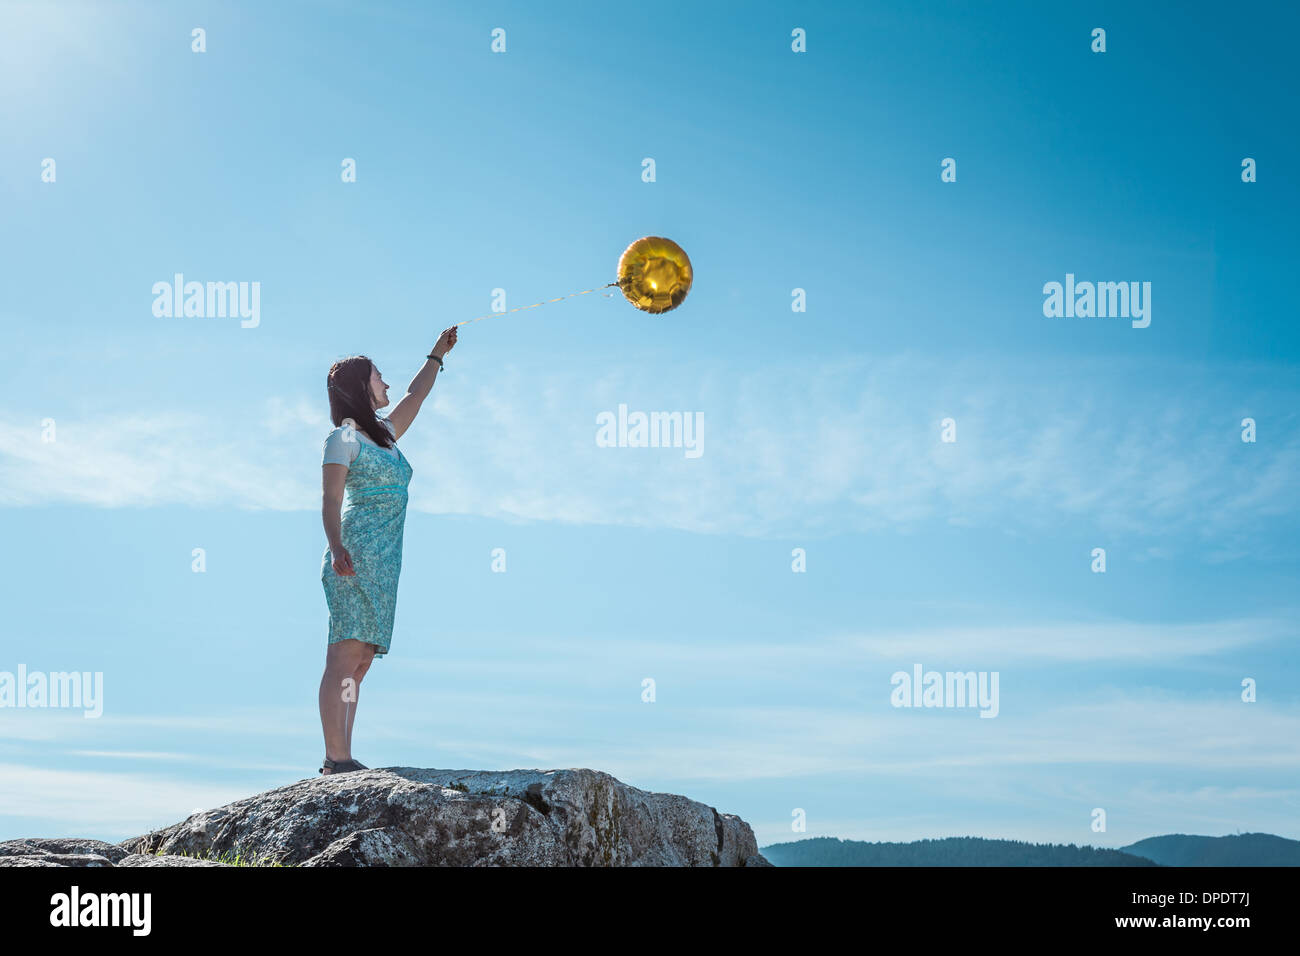 Mature woman standing on rock with golden balloon Stock Photo